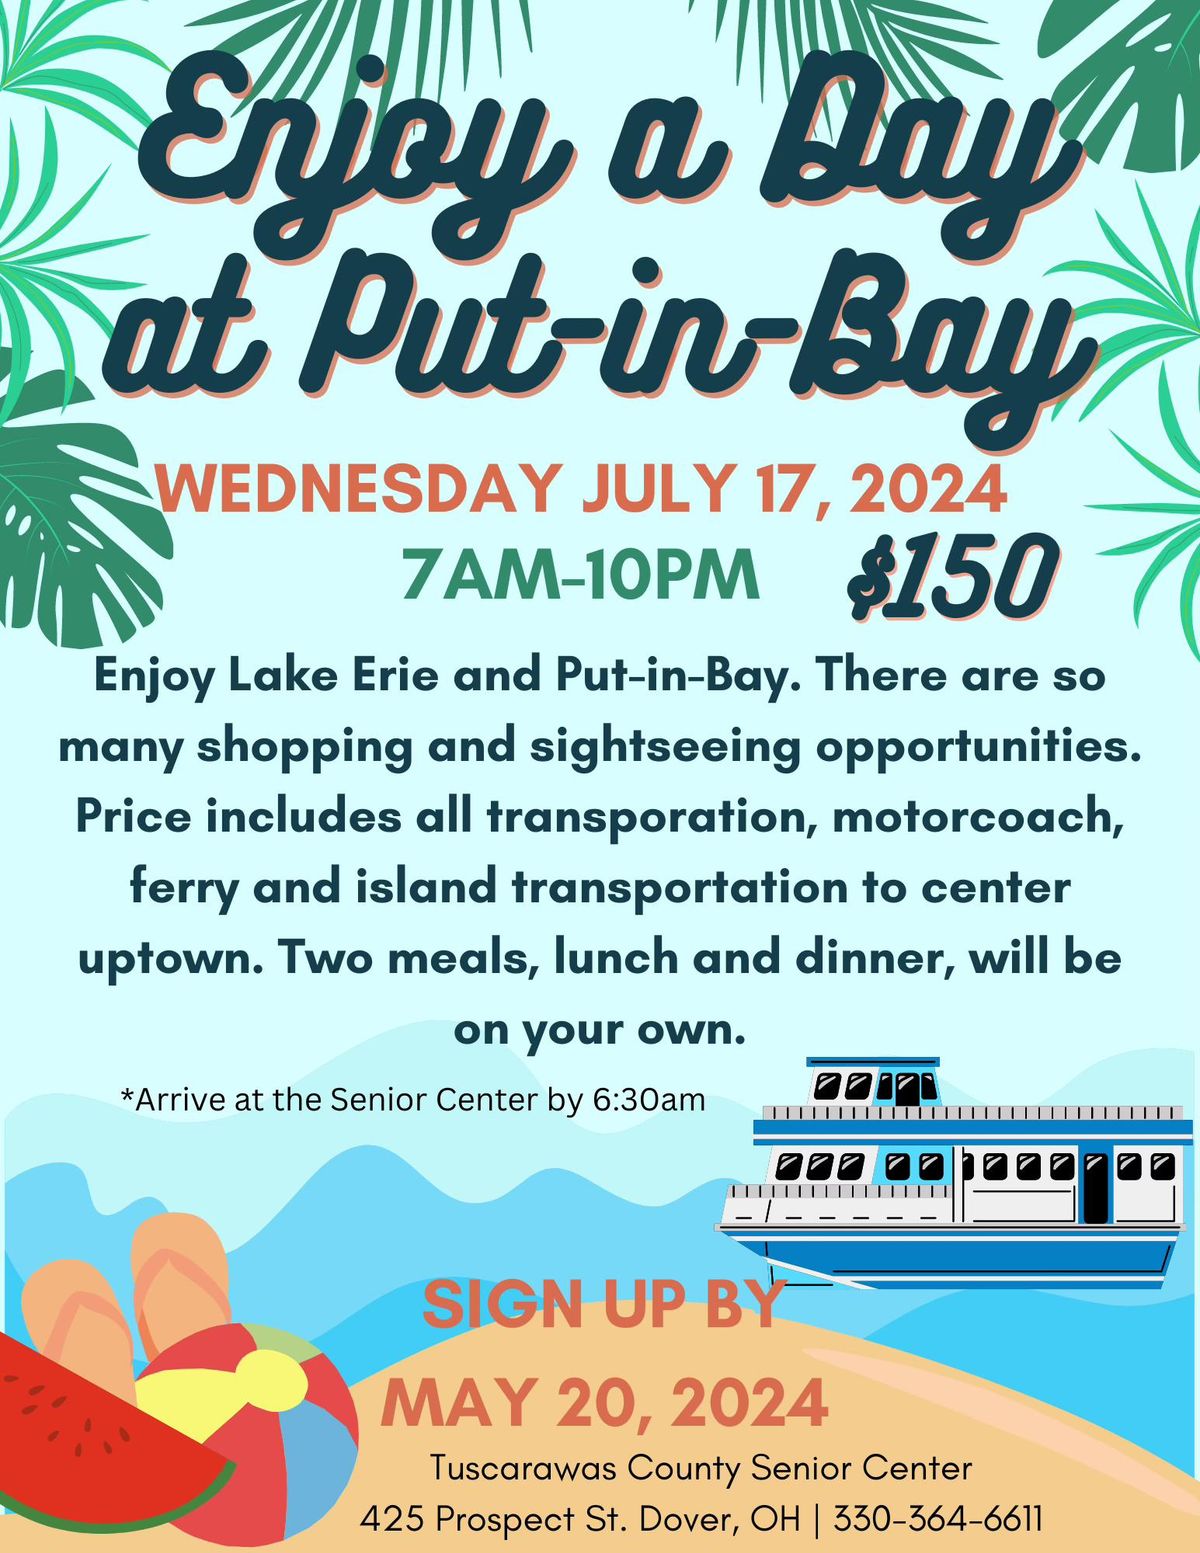 Enjoy a Day at Put-in-Bay!